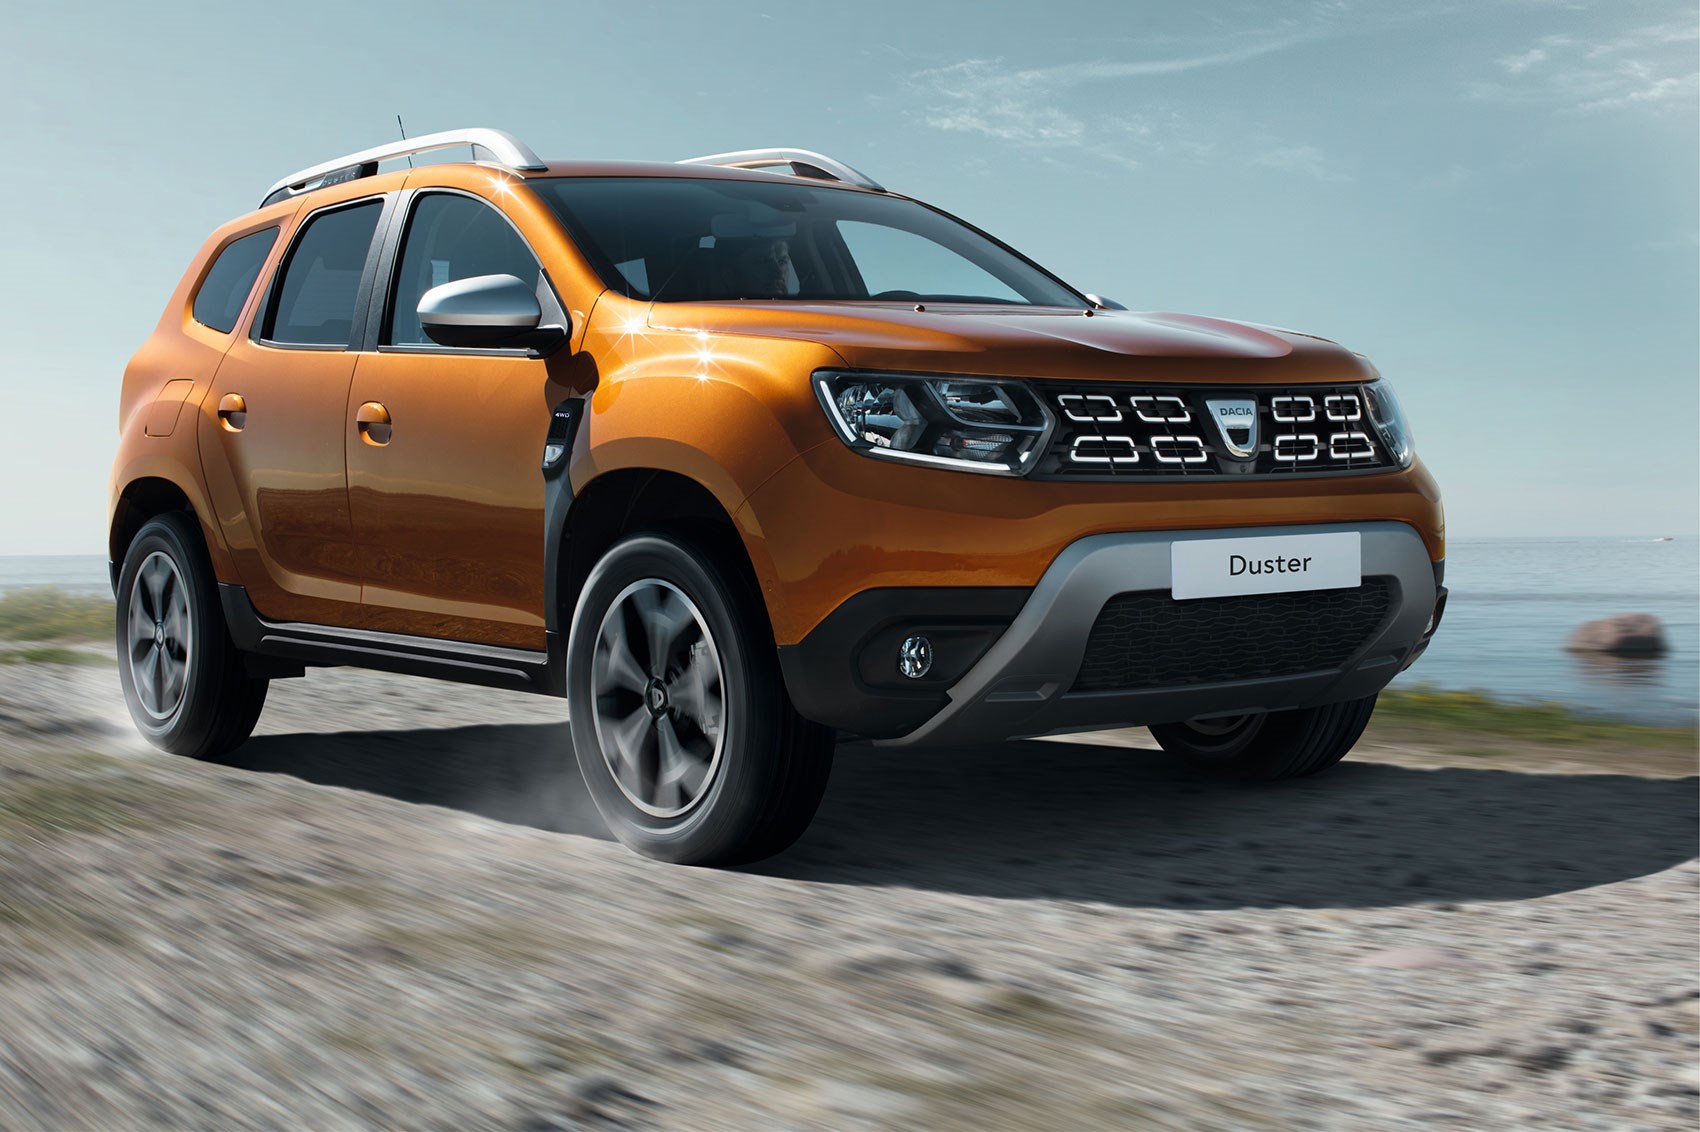  New  2022 Dacia  Duster  revealed pictures specs details 